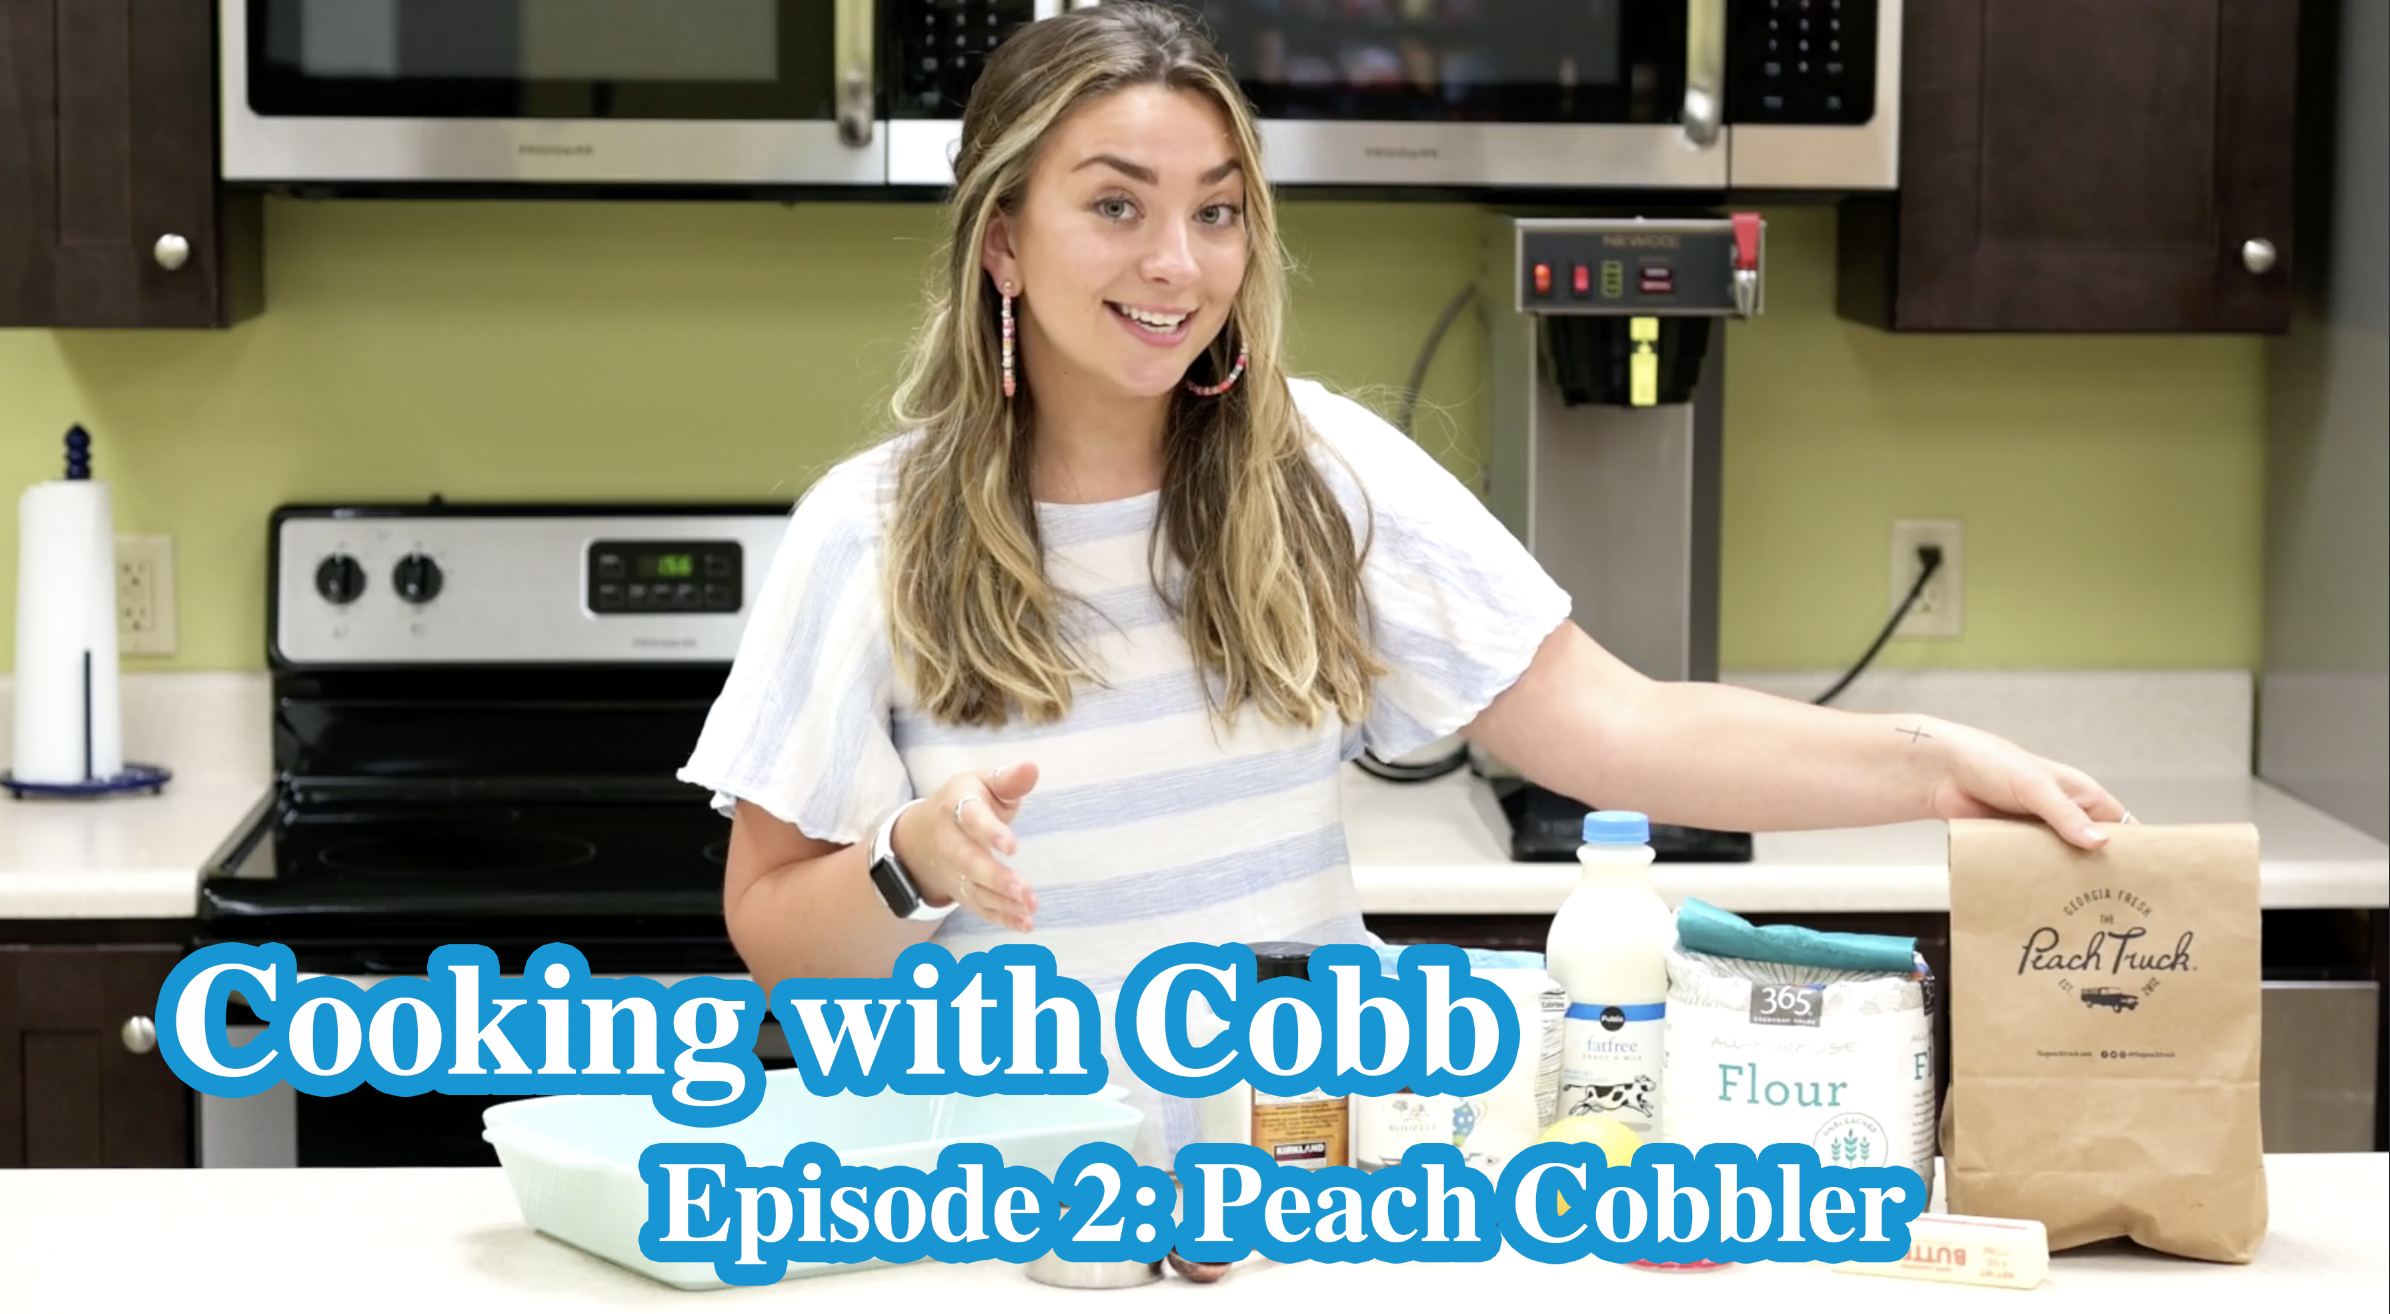 Cooking With Cobb - Peach Cobbler